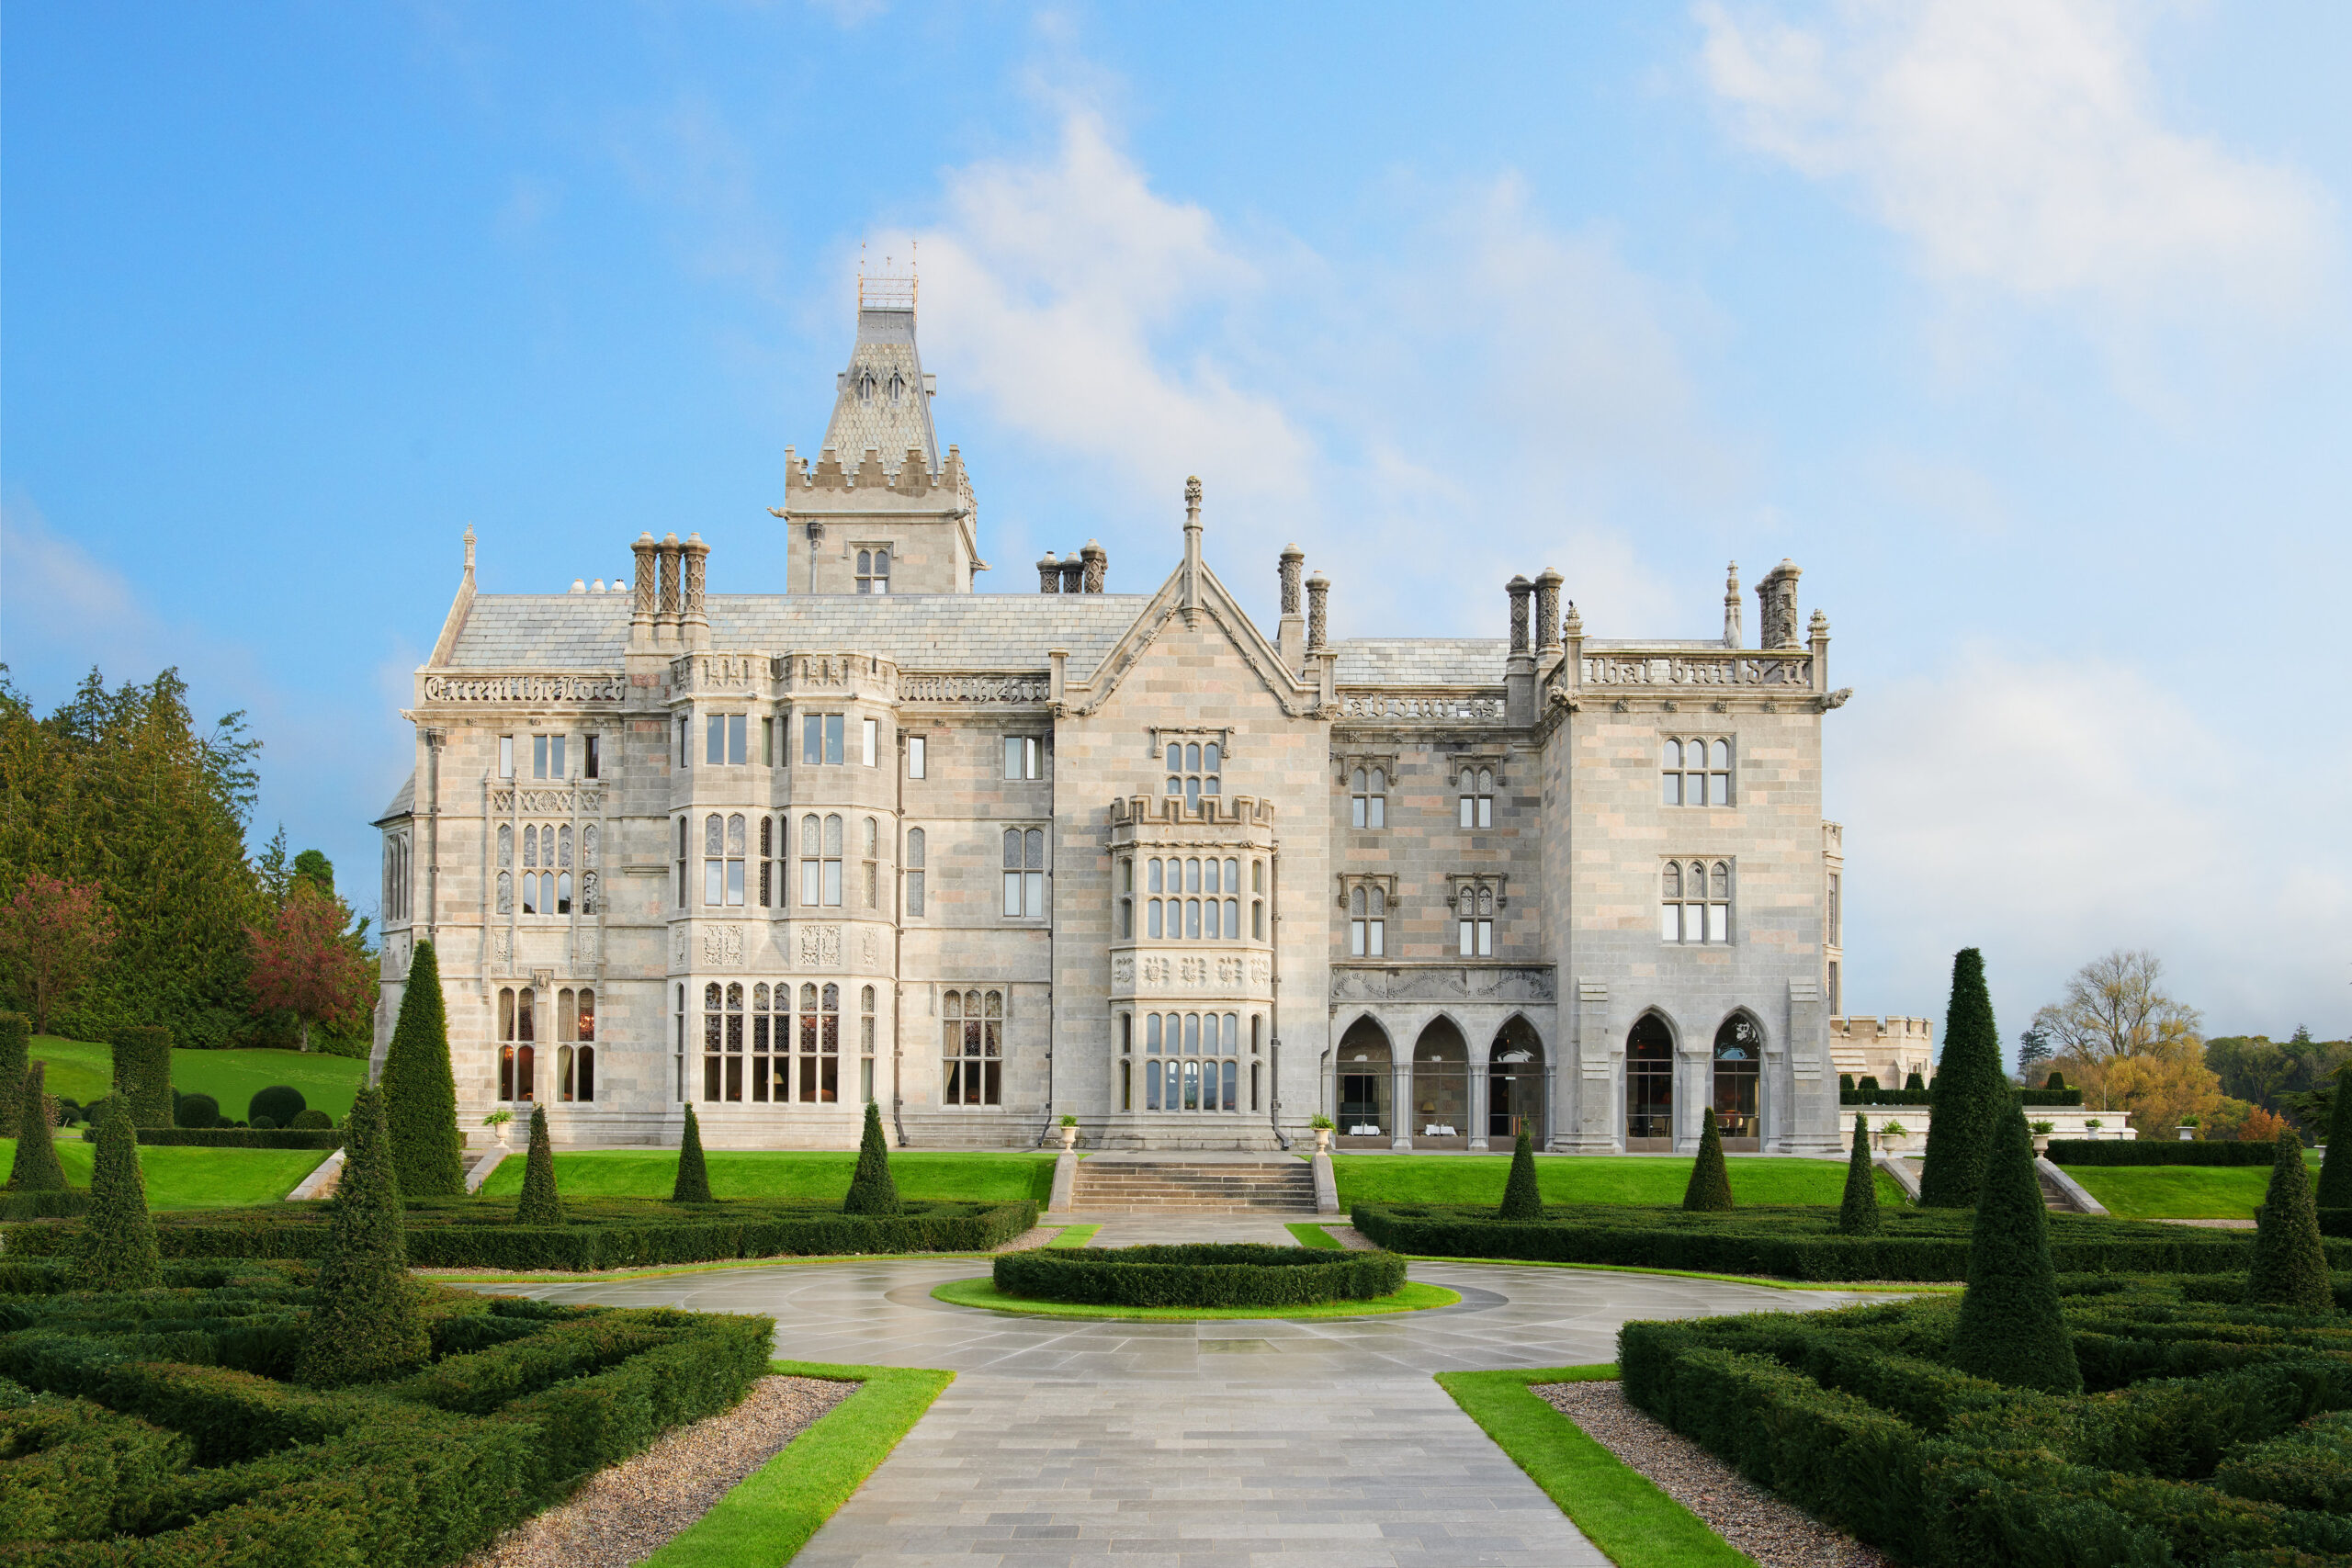 Adare Manor in Limerick, Ireland (image courtesy of Leading Hotels of the World)